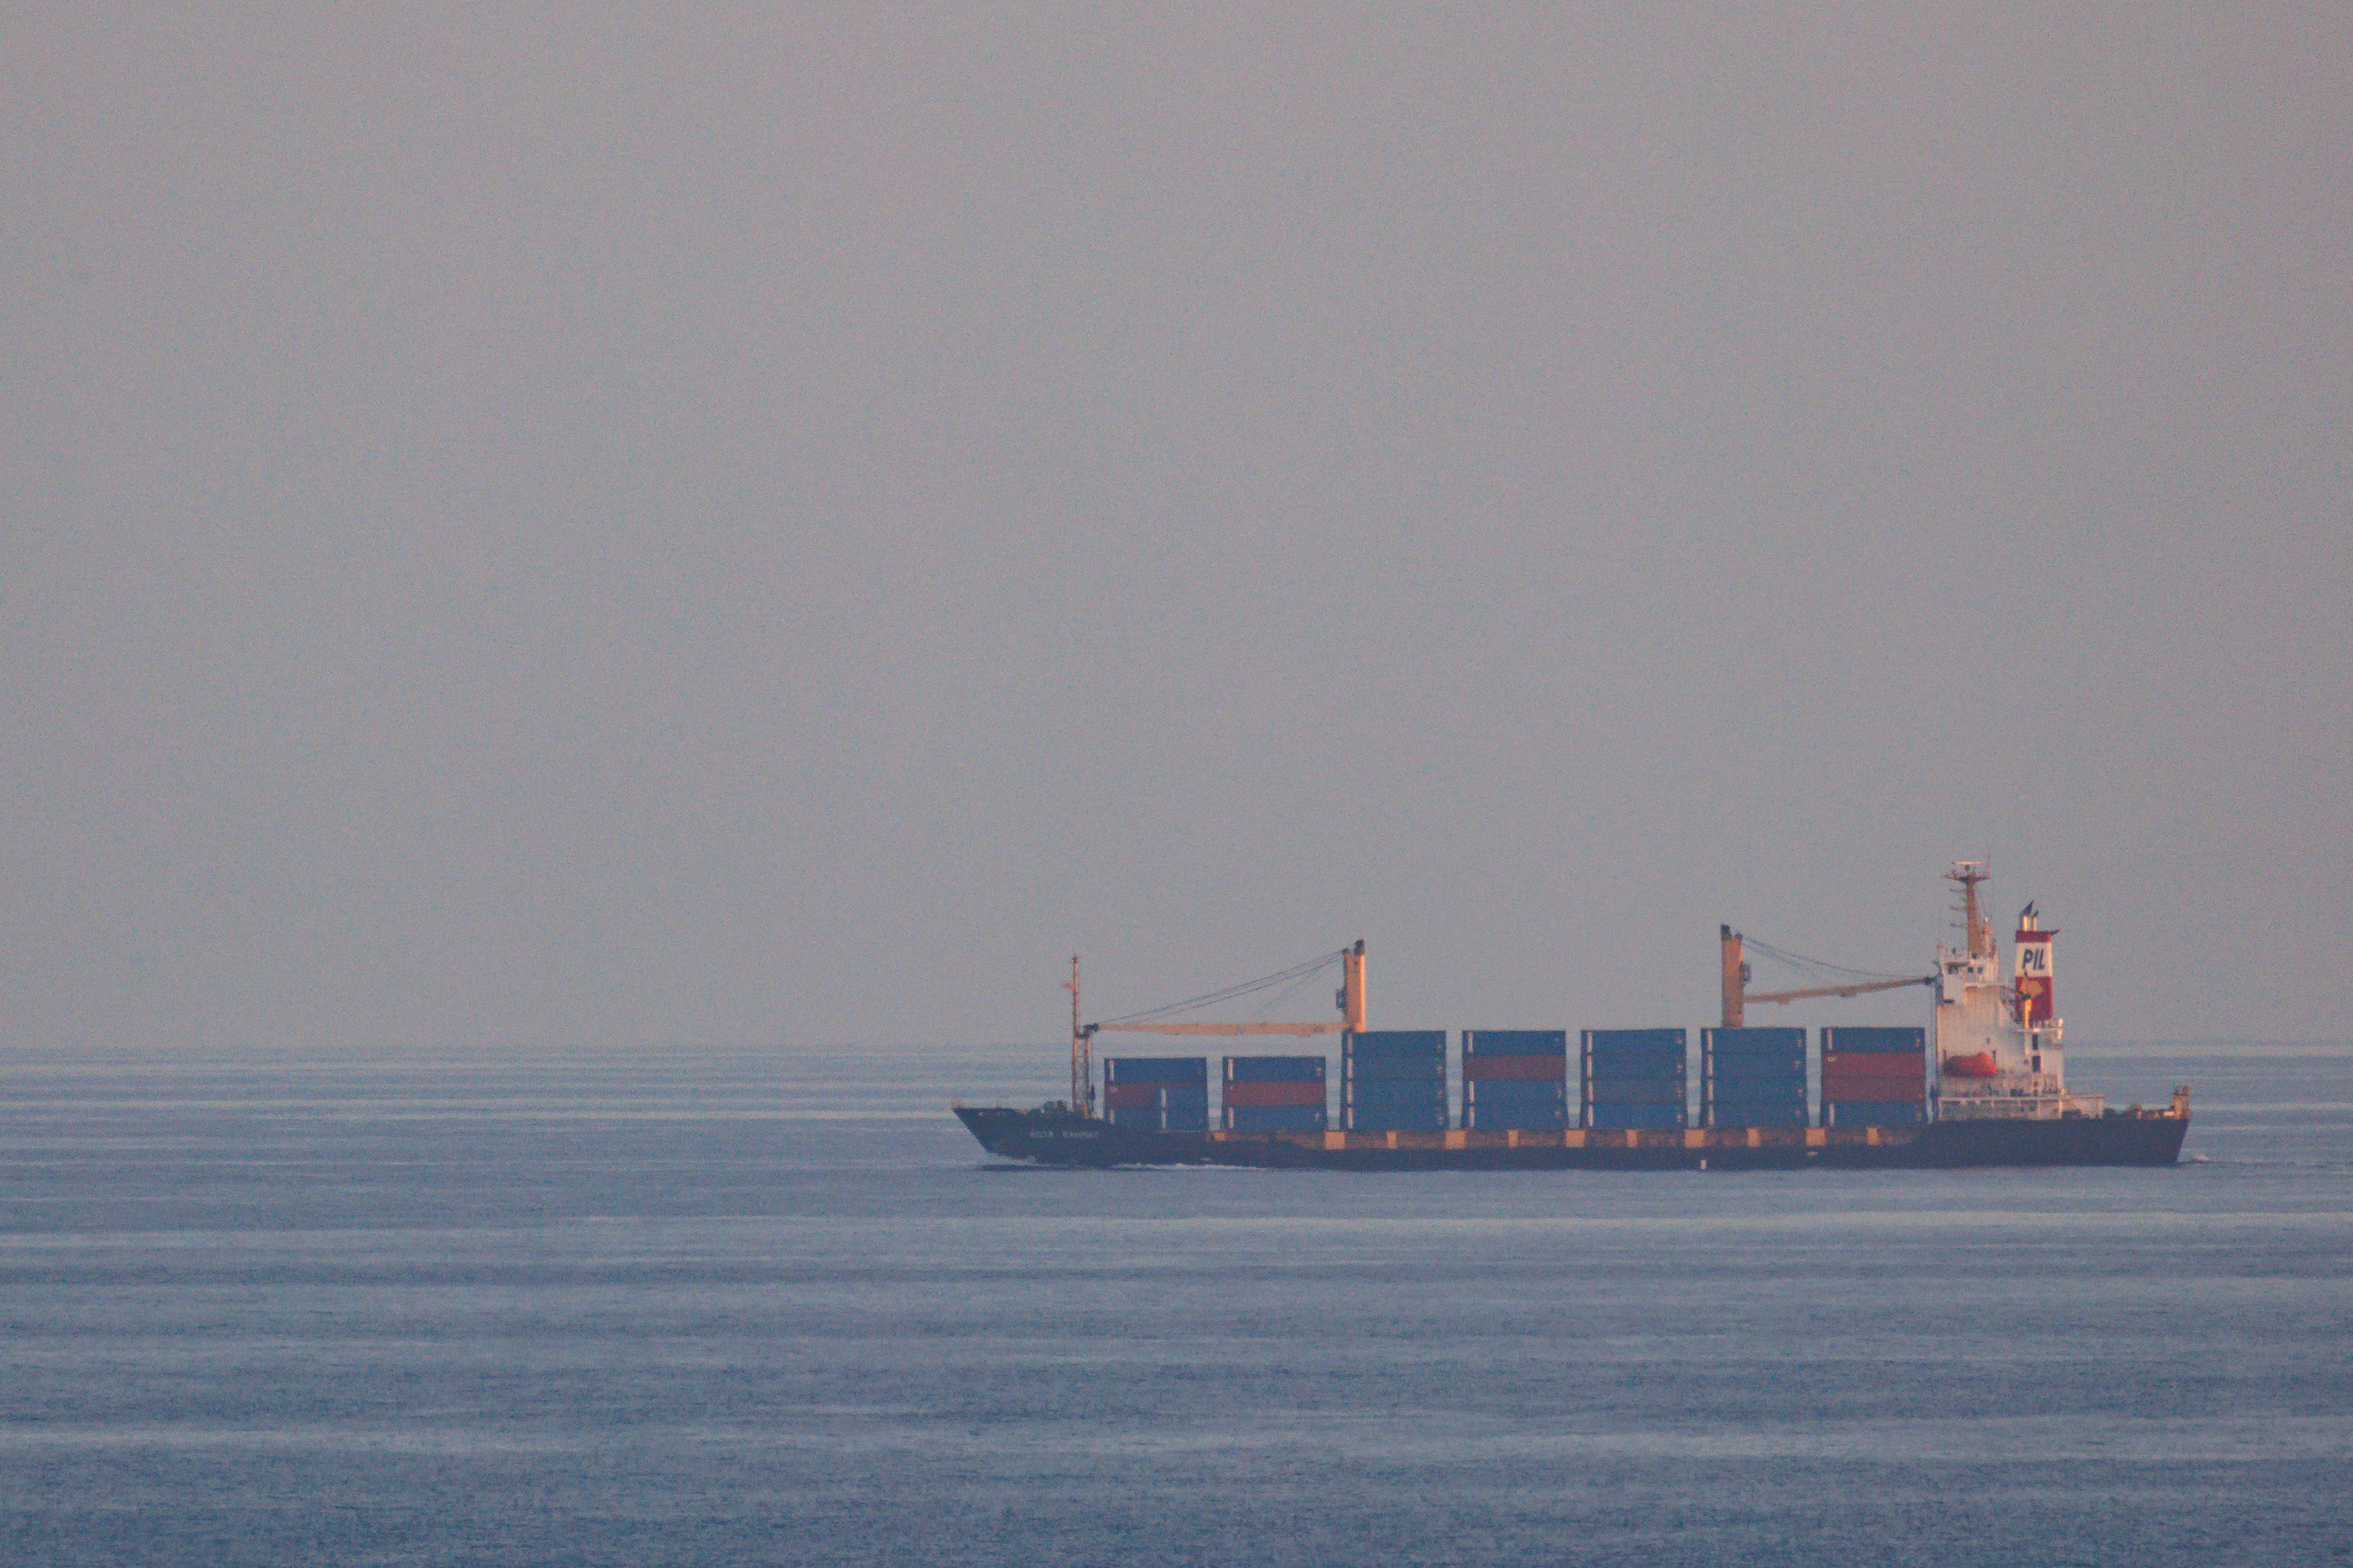 File photo: A container ship in the Gulf of Aden